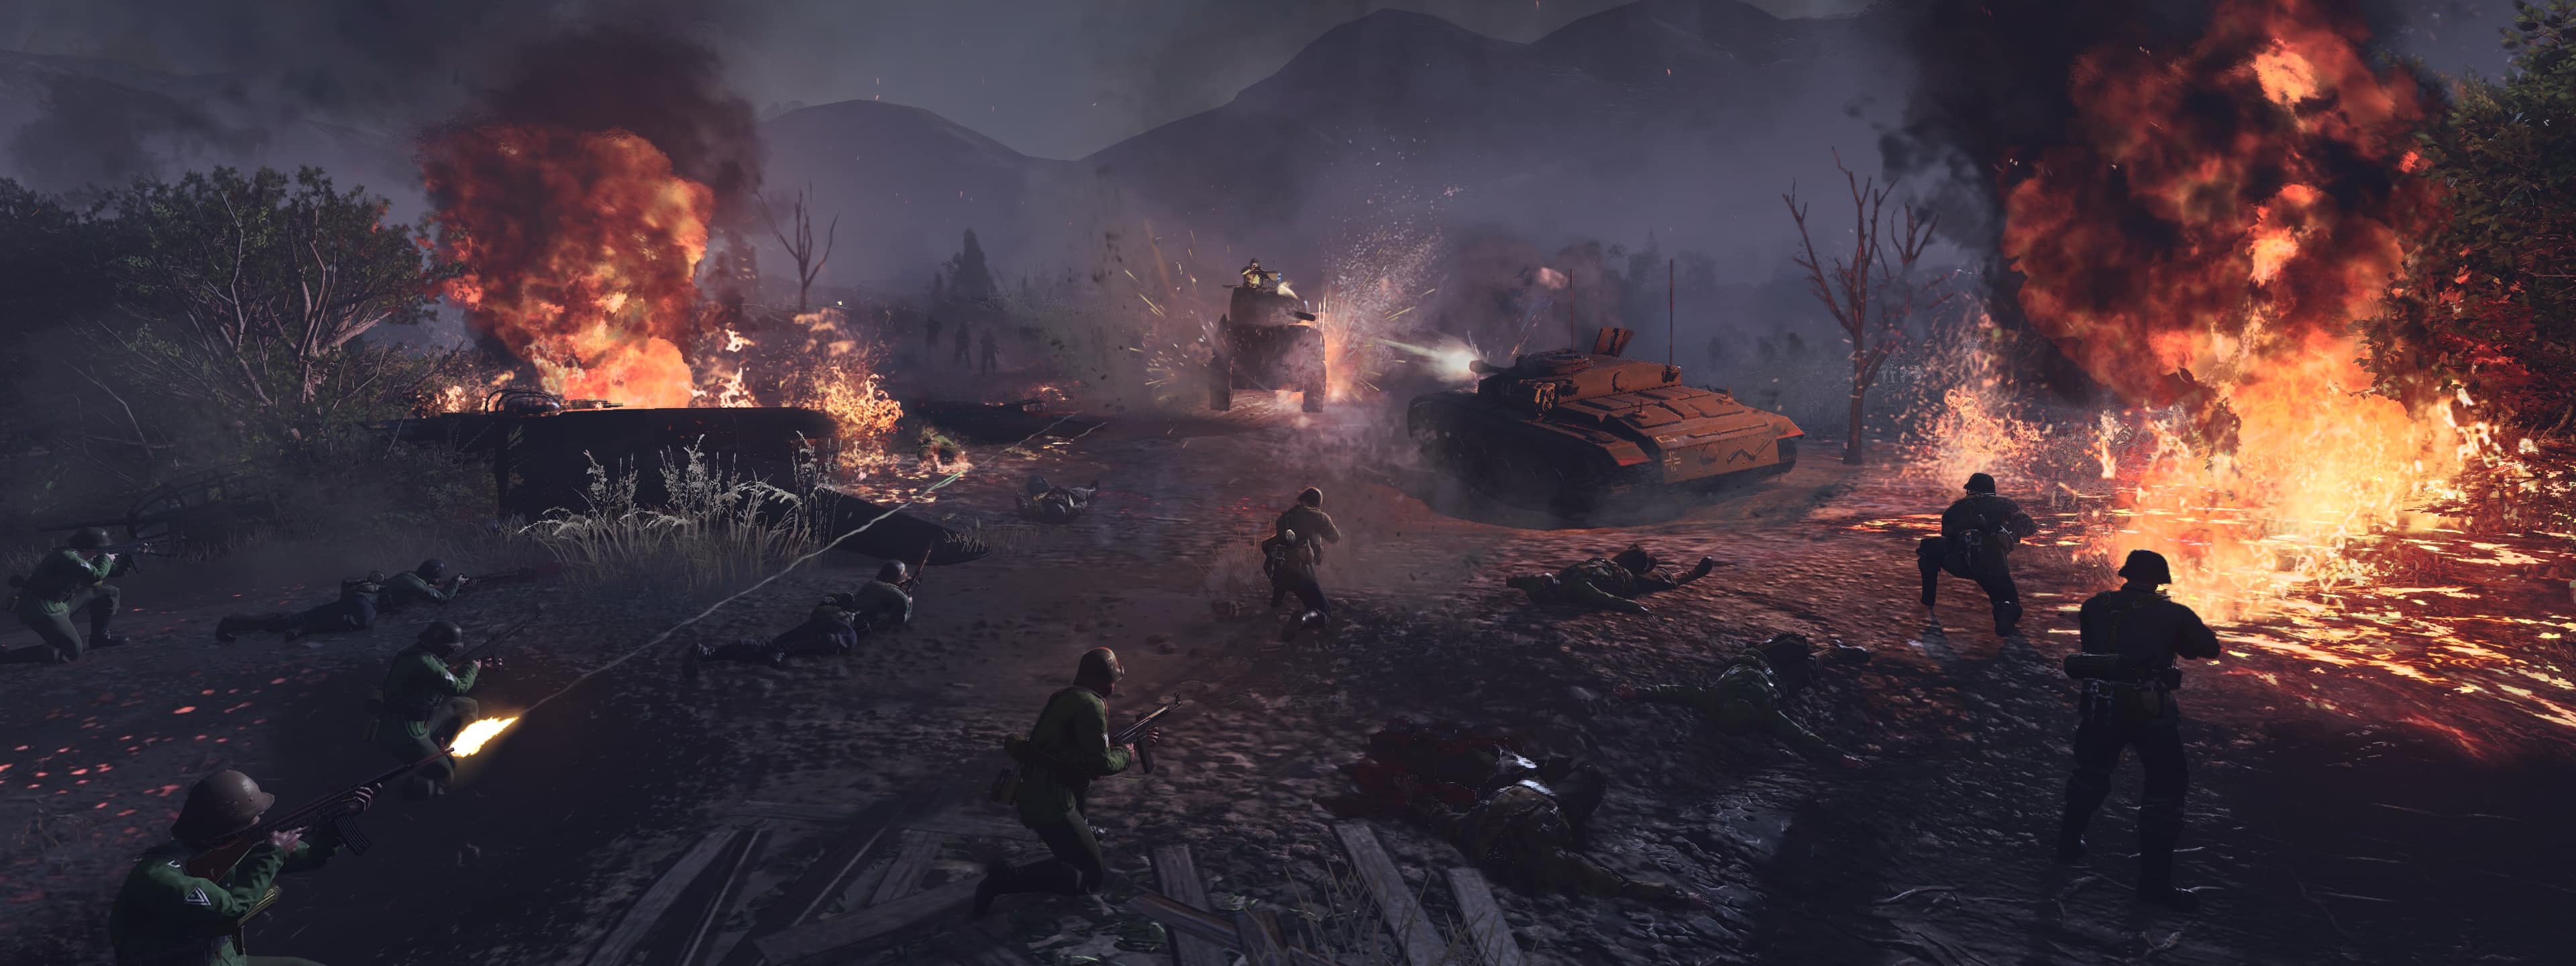 Company of Heroes 3 Hands On - Impressions GamersRD 156 (2)